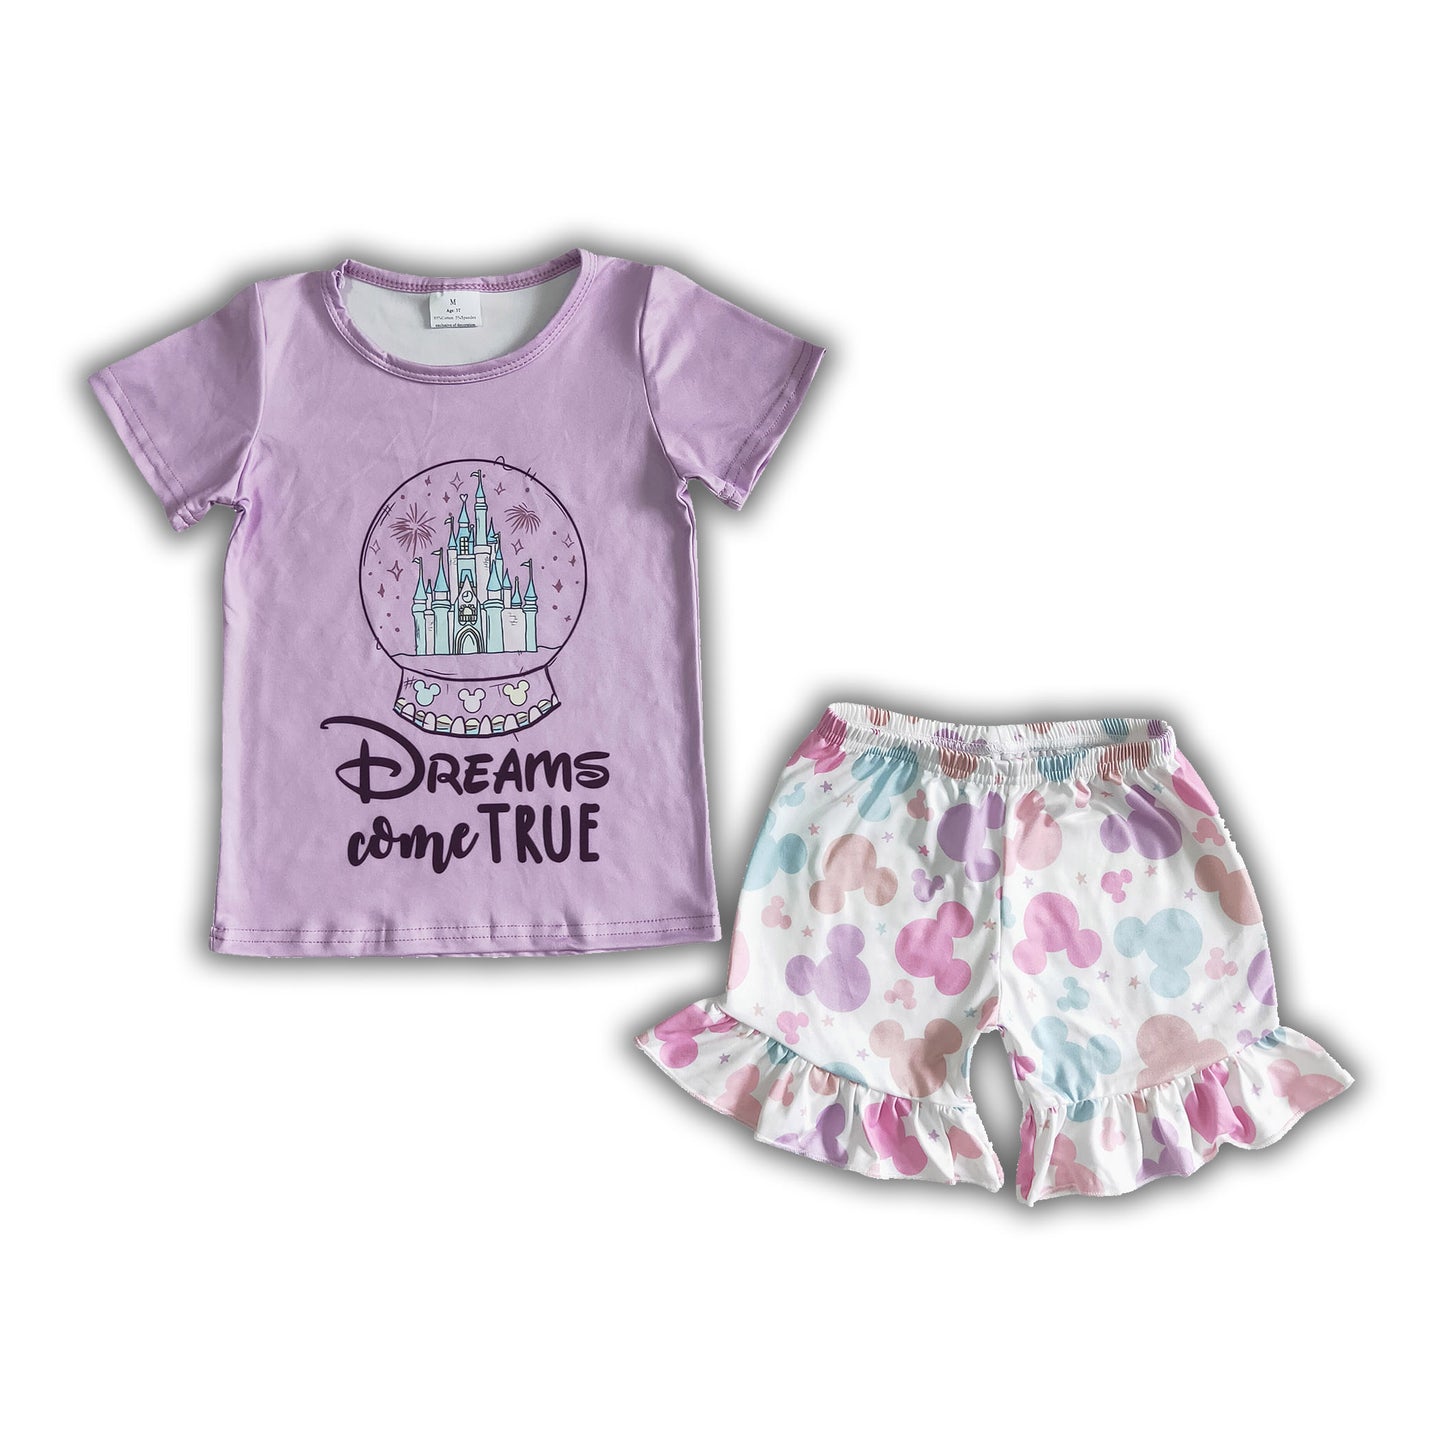 Dreams come true cute baby girls outfits